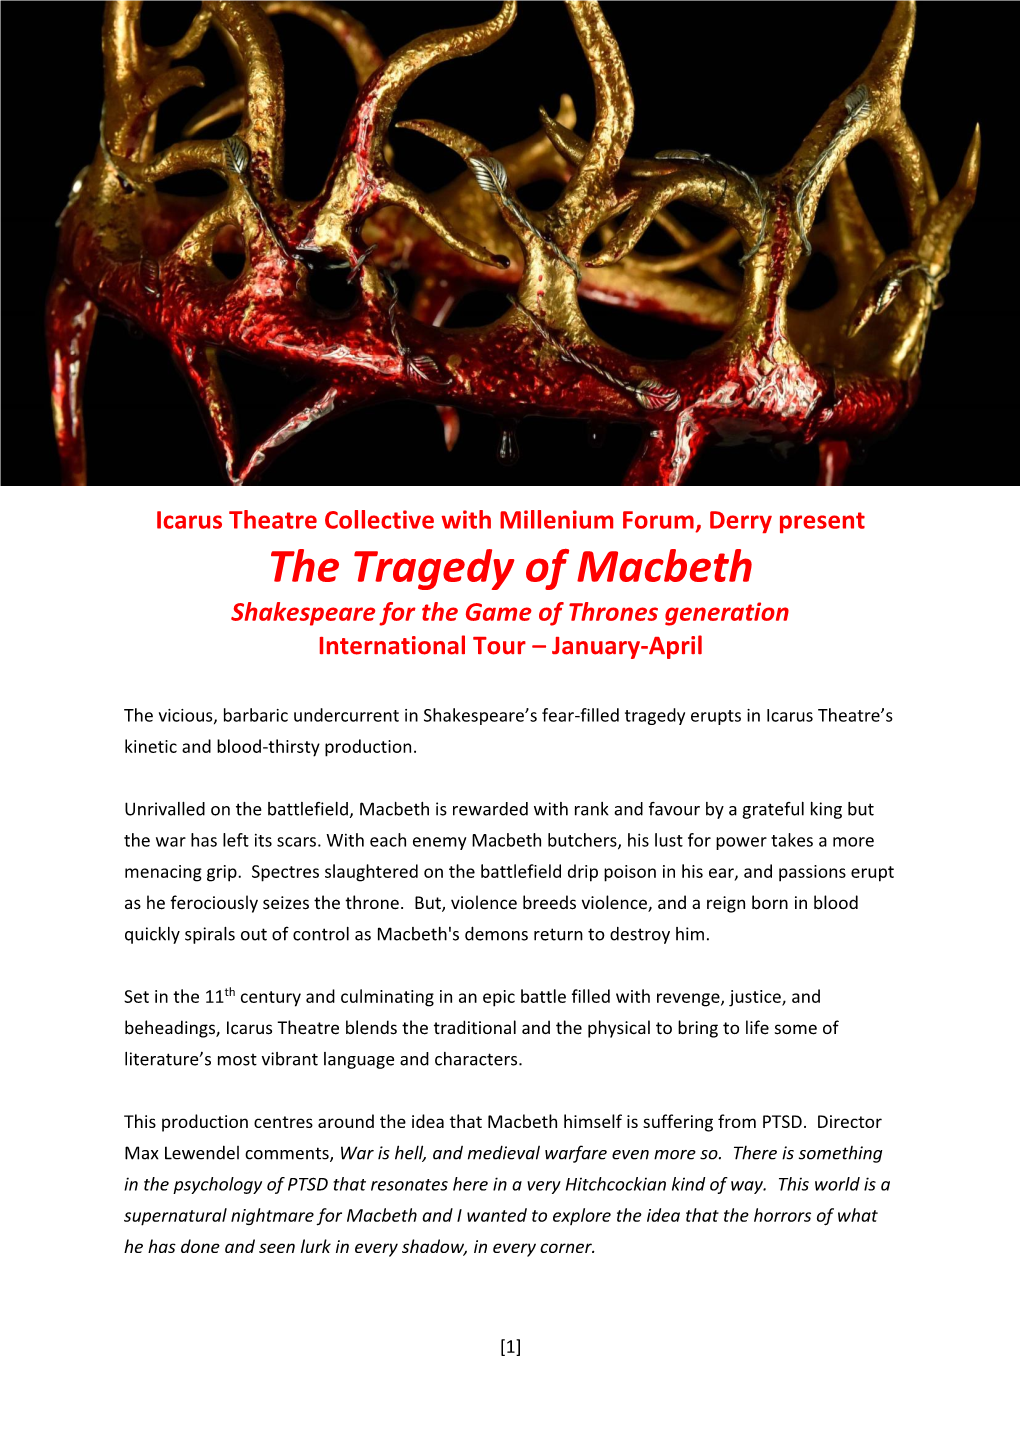 The Tragedy of Macbeth Shakespeare for the Game of Thrones Generation International Tour – January-April